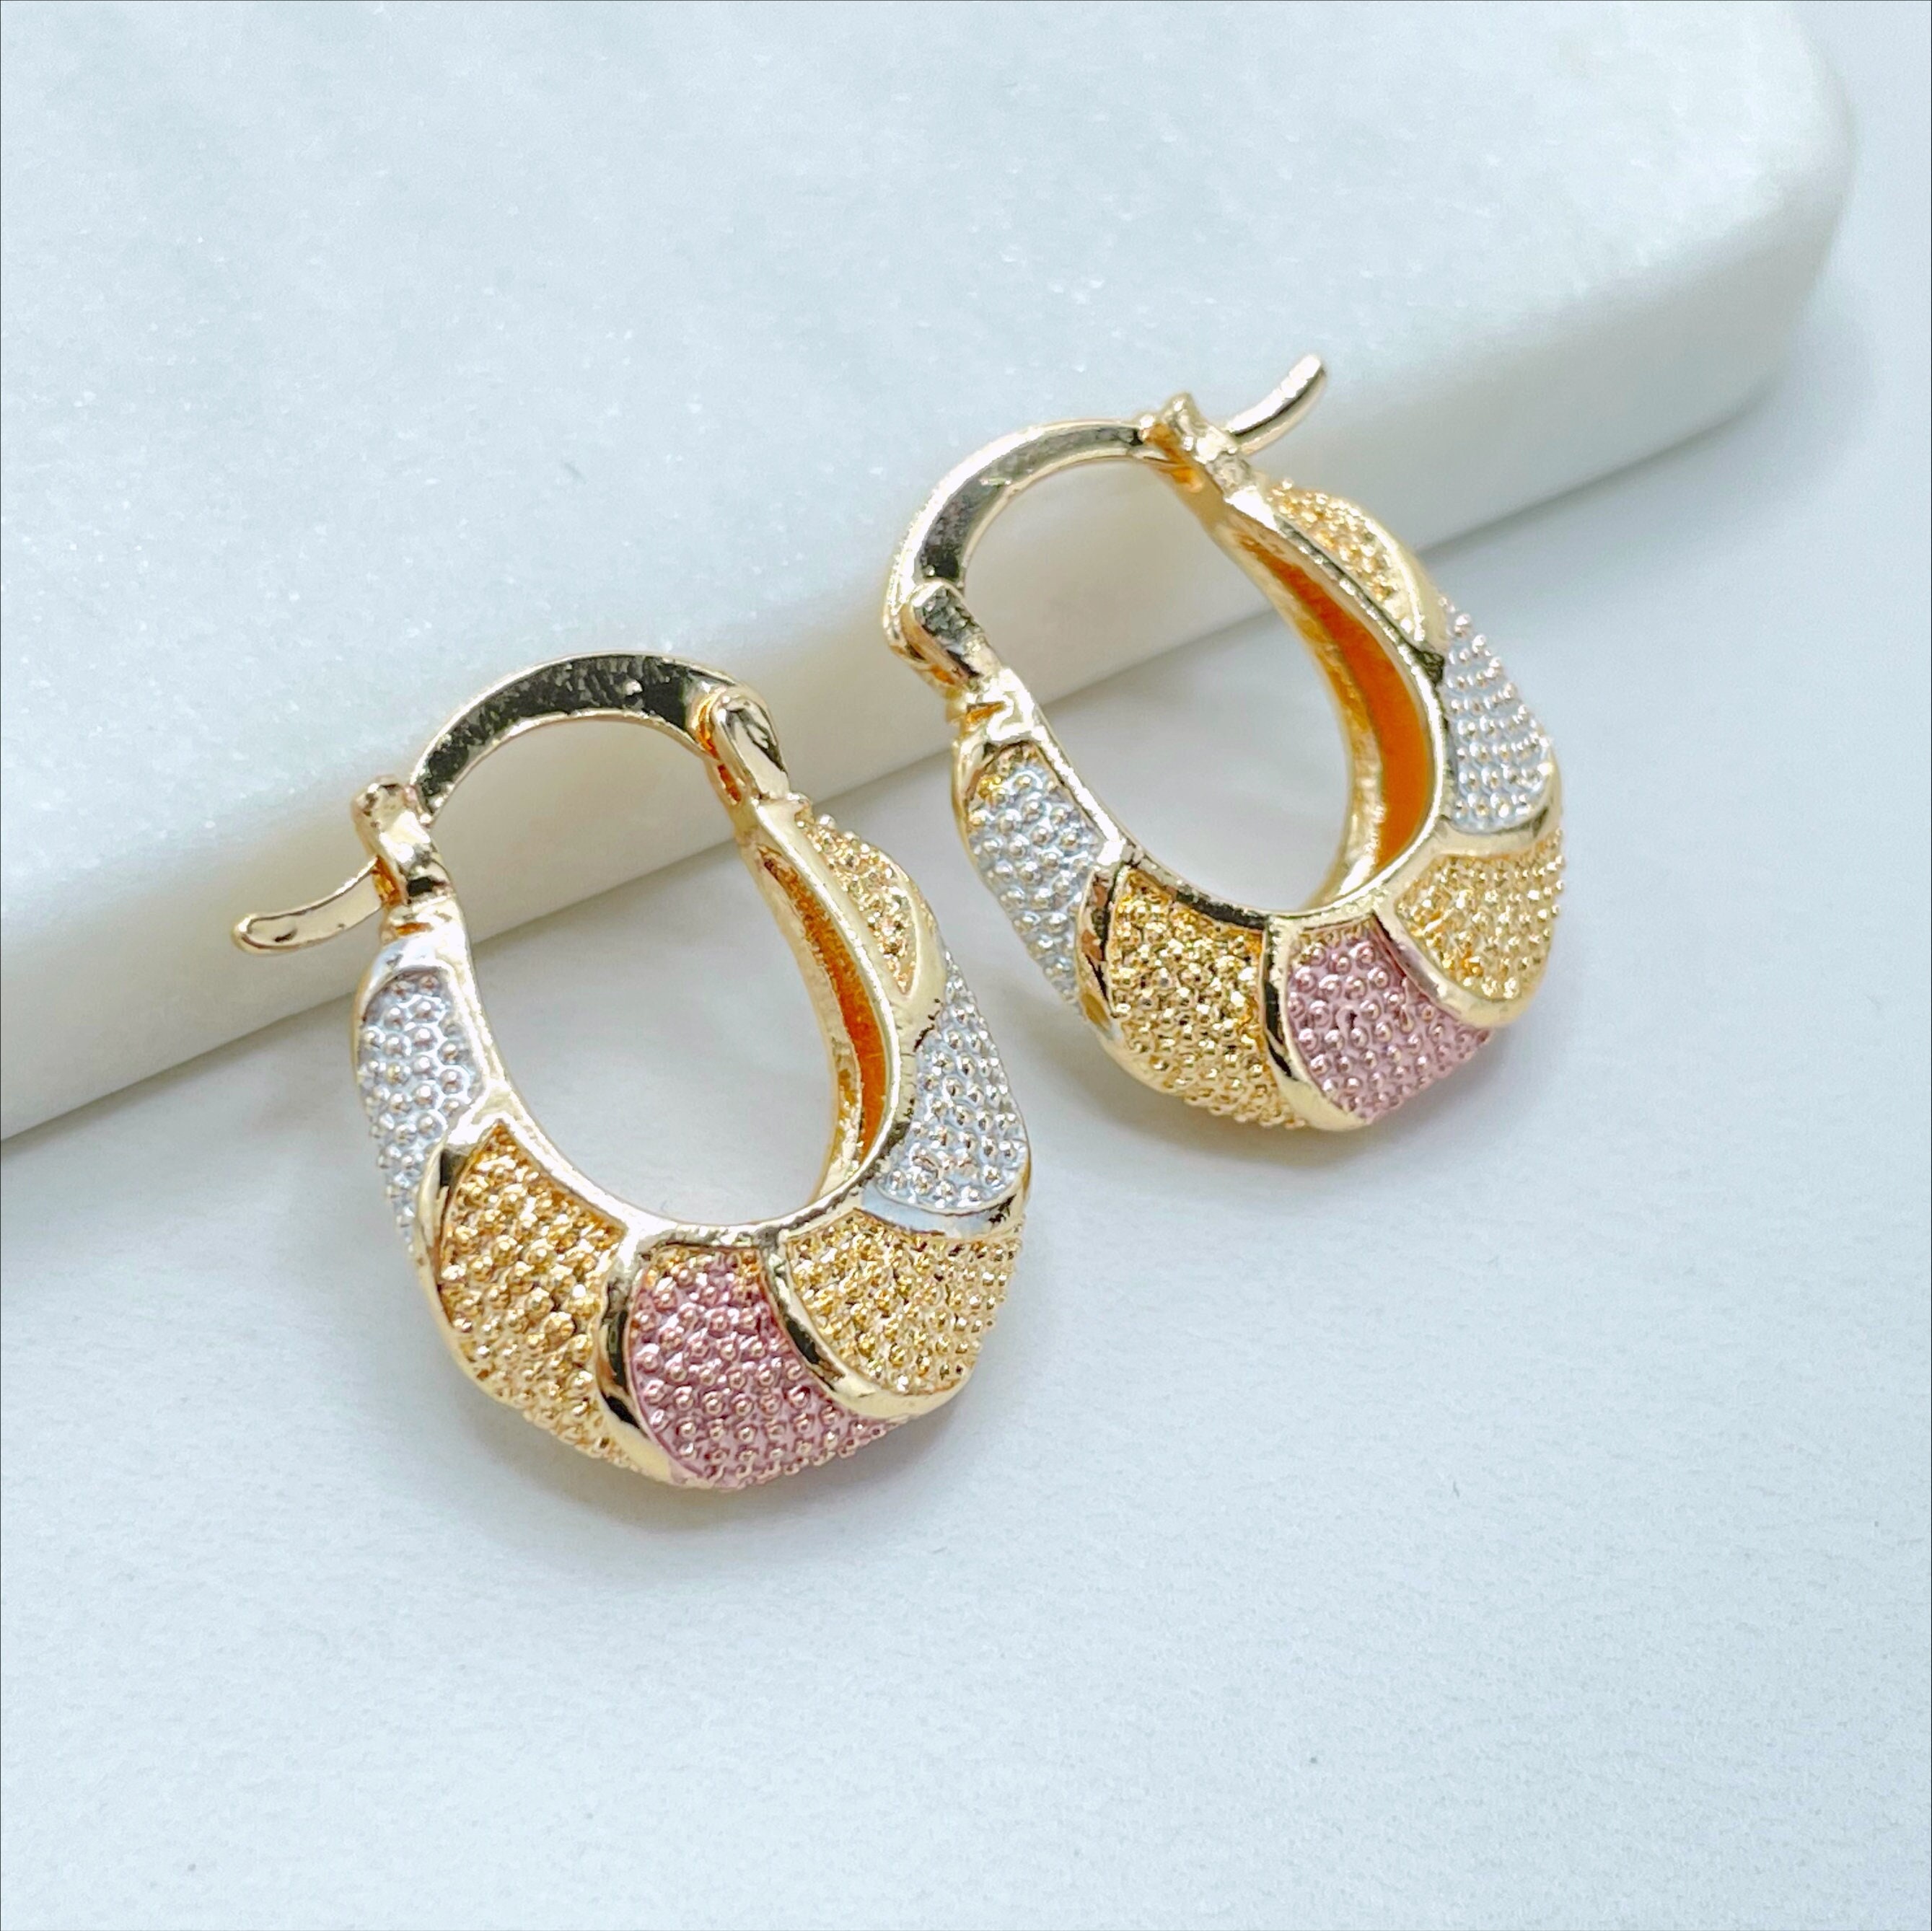 4 Gold Tone Hoops or Dangle DIY Earrings - Jewelry Making for Two